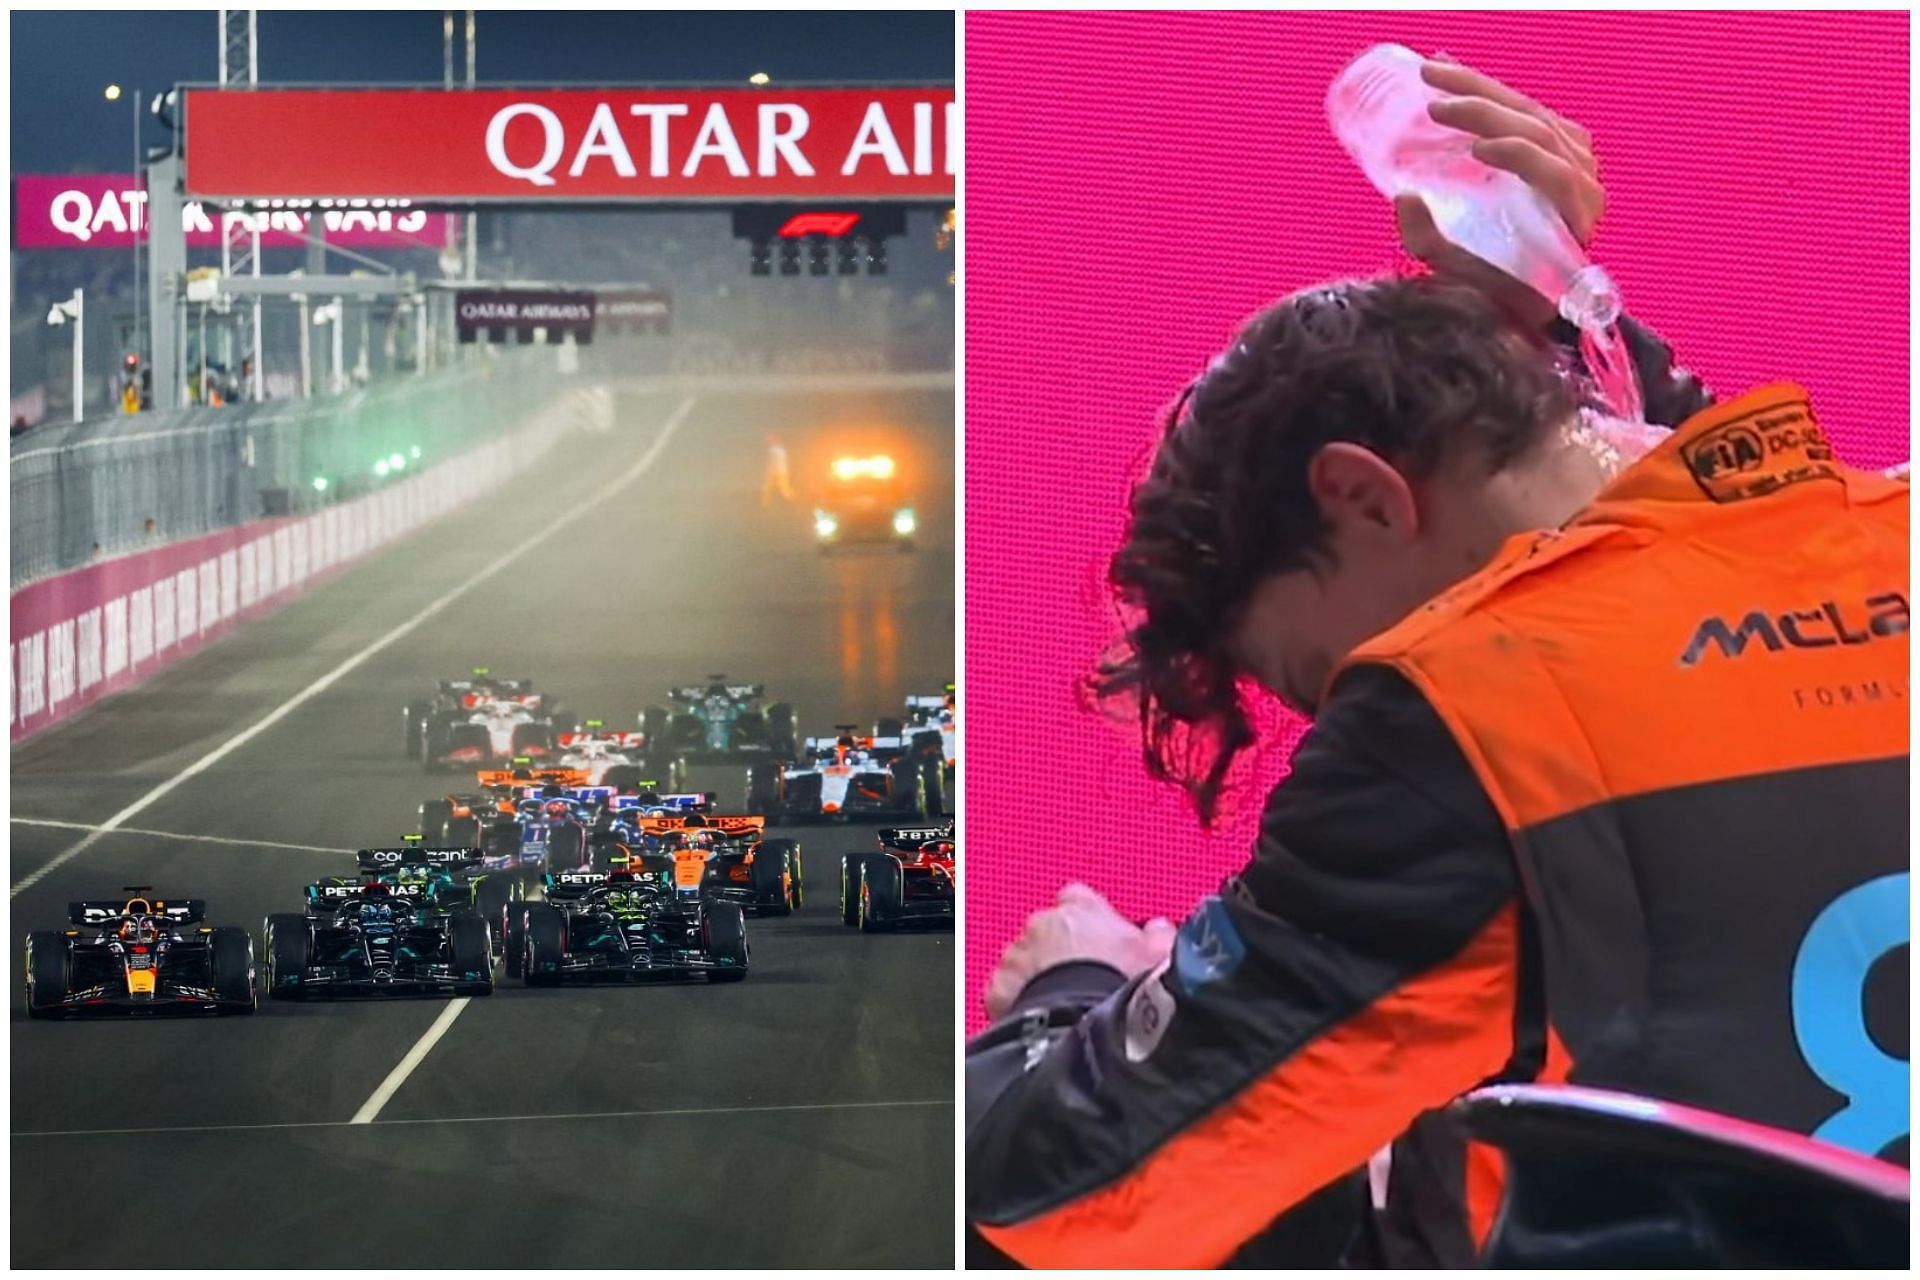 Many drivers were extremely exhausted due to intense weather conditions during the 2023 F1 Qatar Grand Prix (Collage via Sportskeeda)